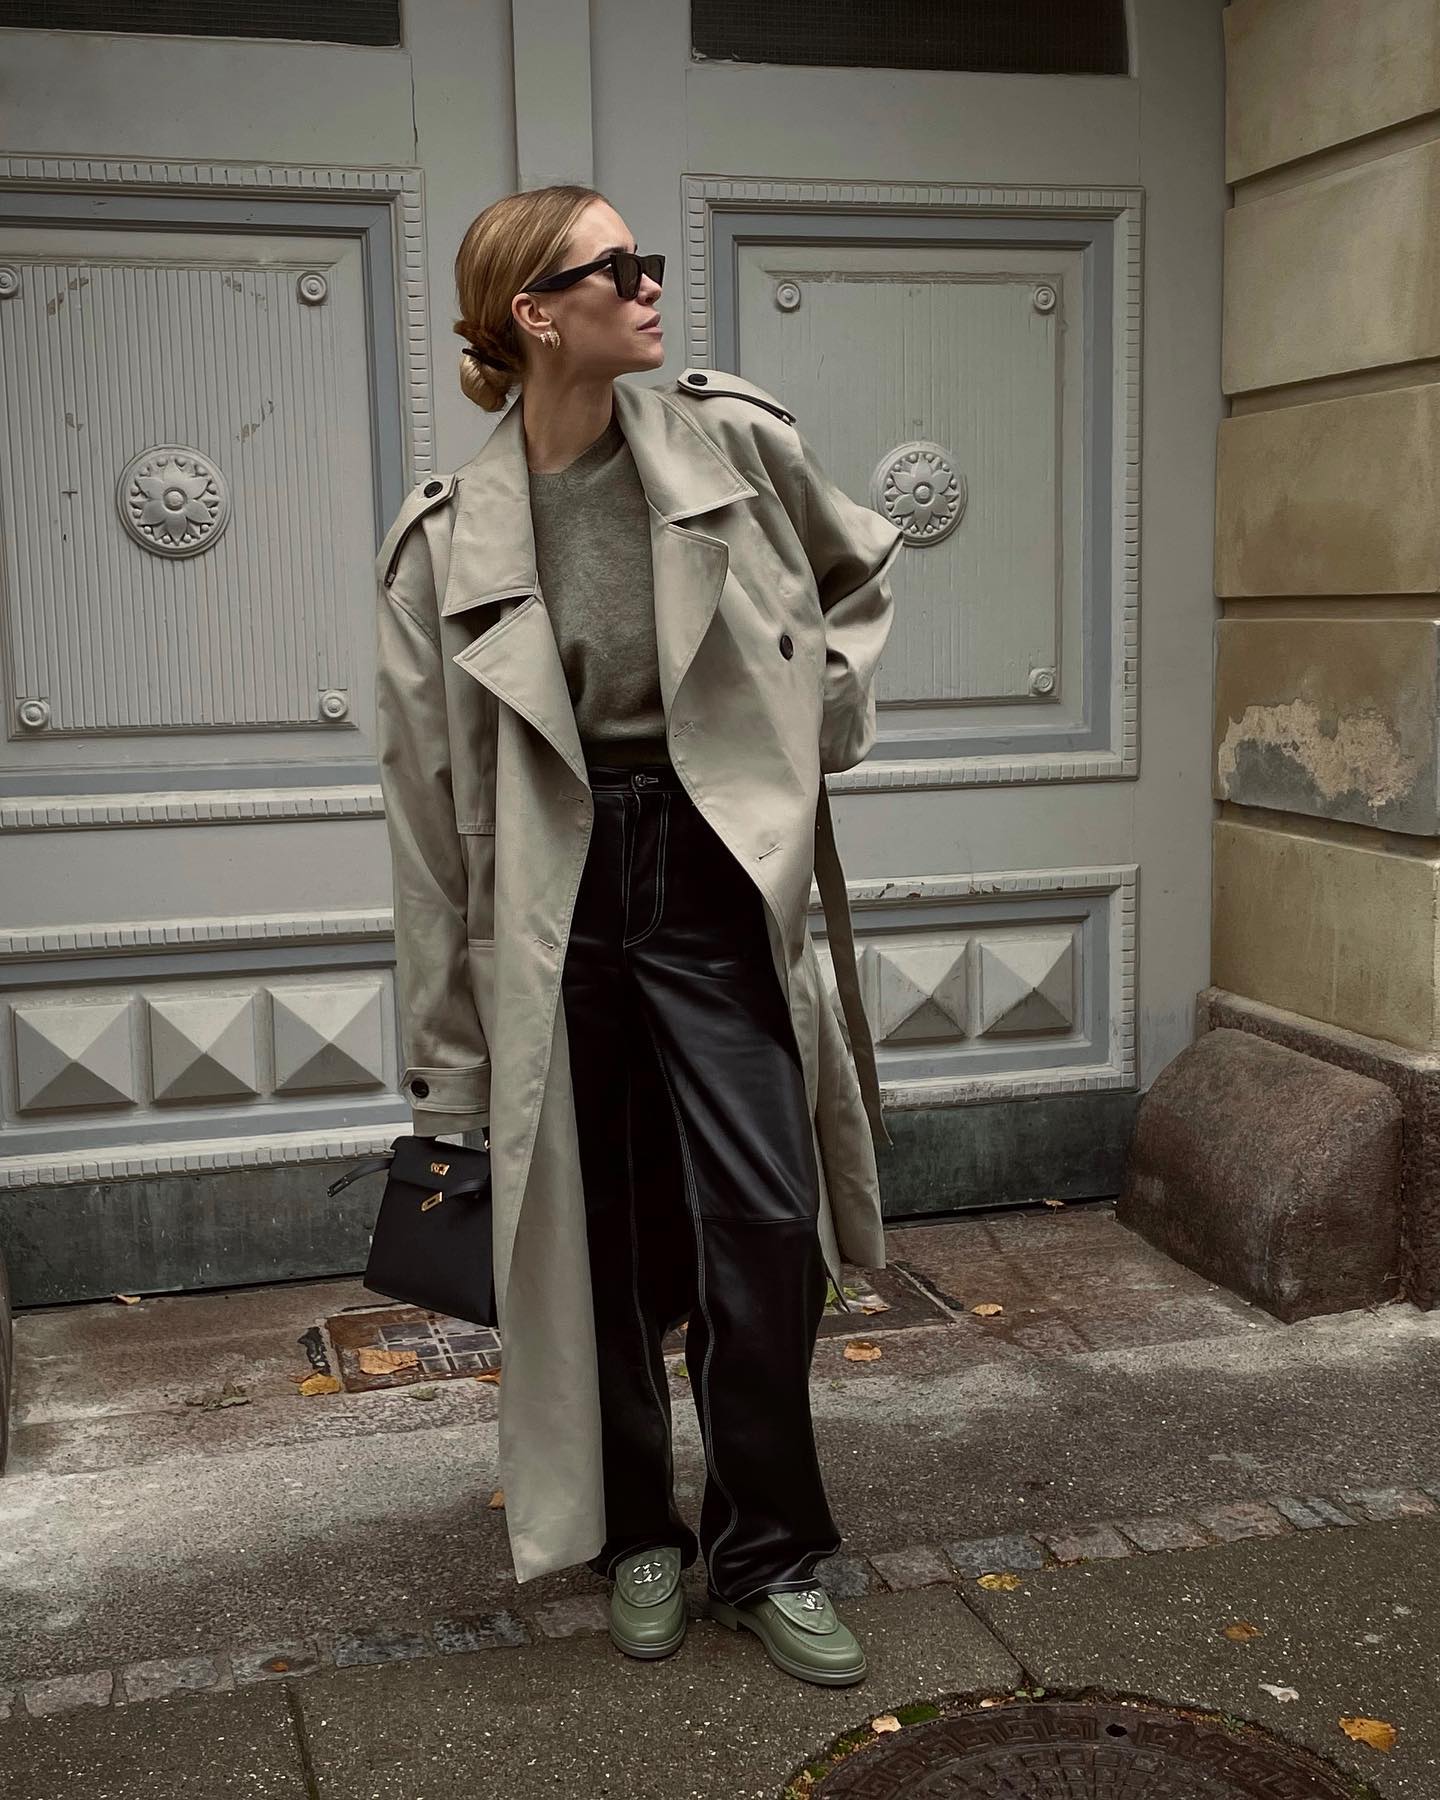 Pernille Teisbaek wearing Chanel loafers with trench coat